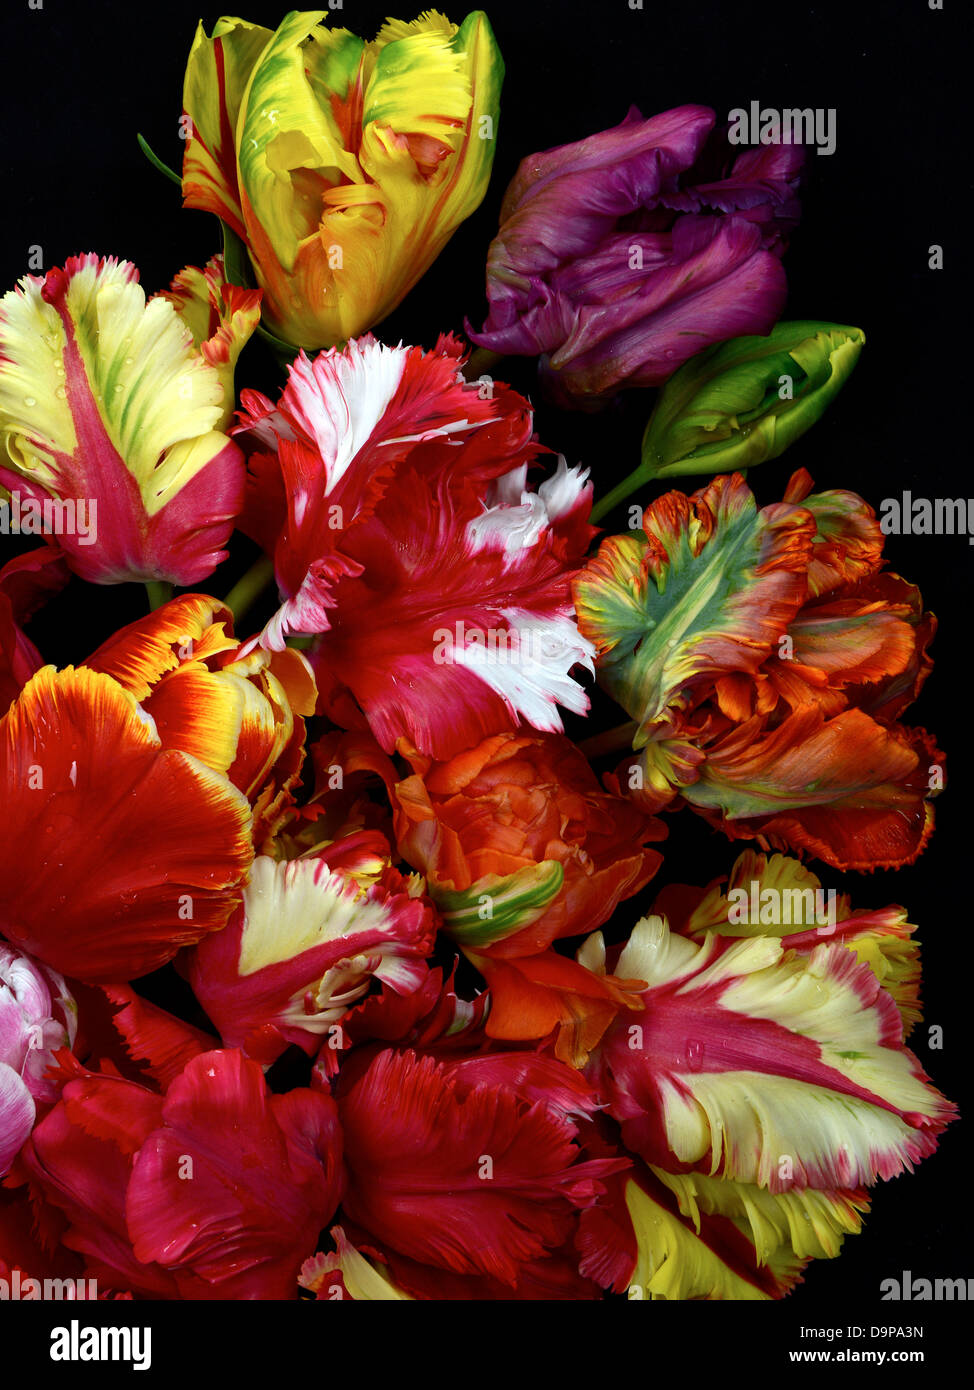 parrot tulips on a black background. Stock Photo